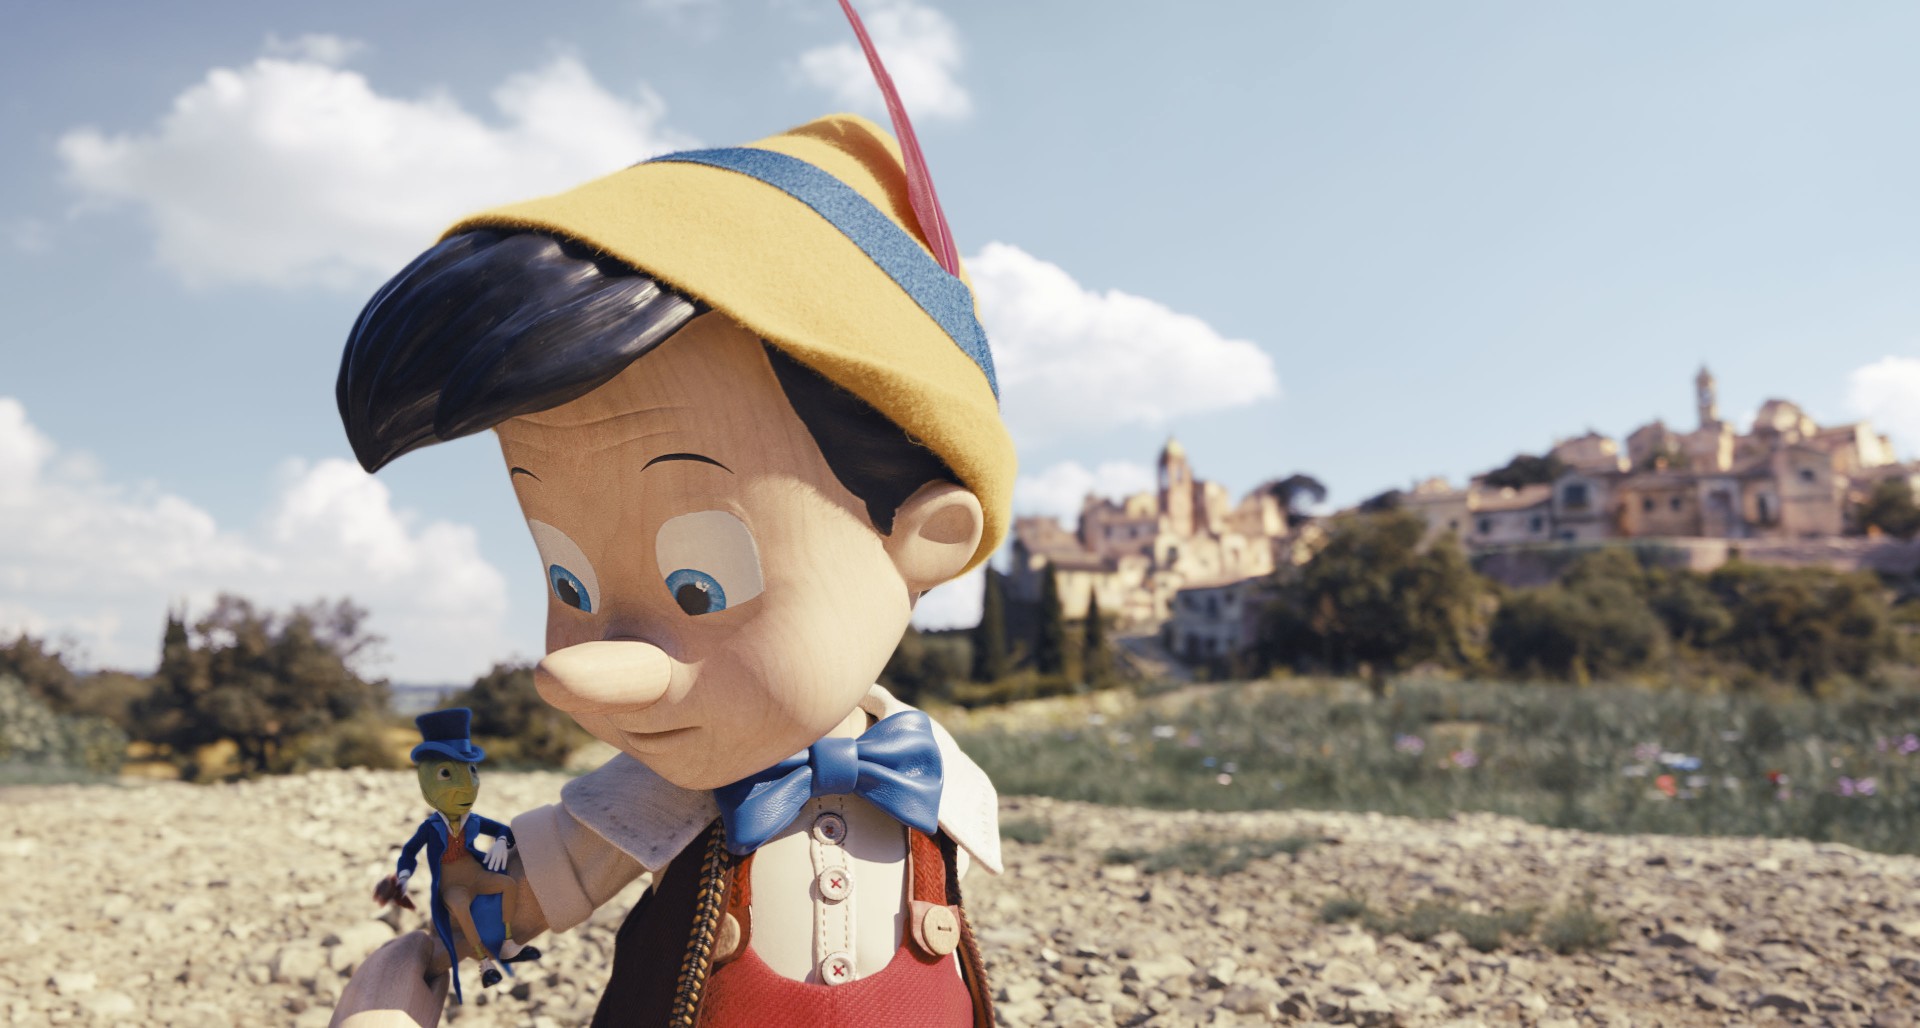 Pinocchio' Review: Another passionless Disney remake | kens5.com